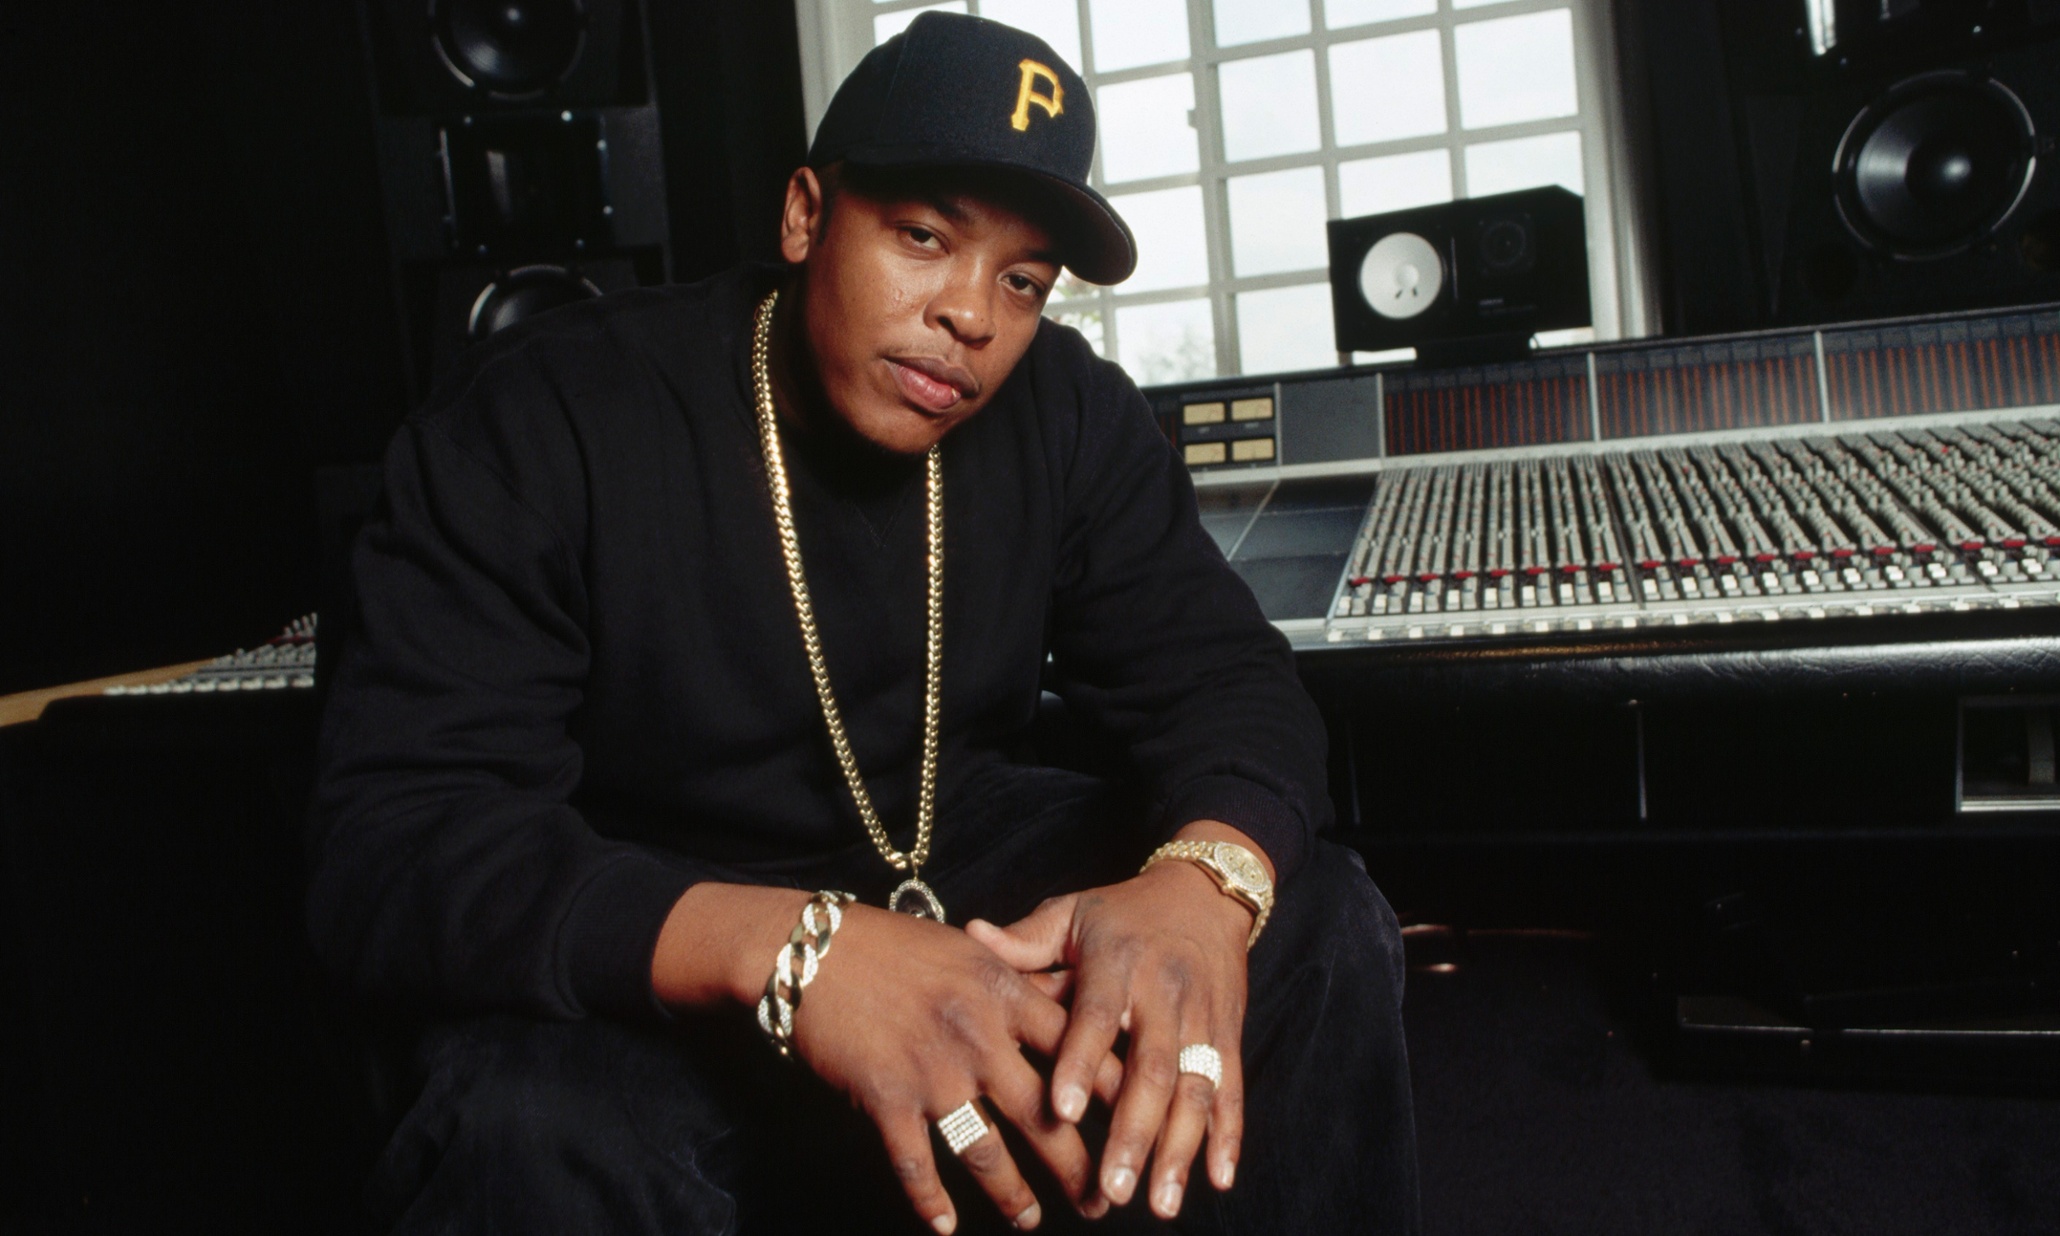 Dr Dre Wallpapers HD